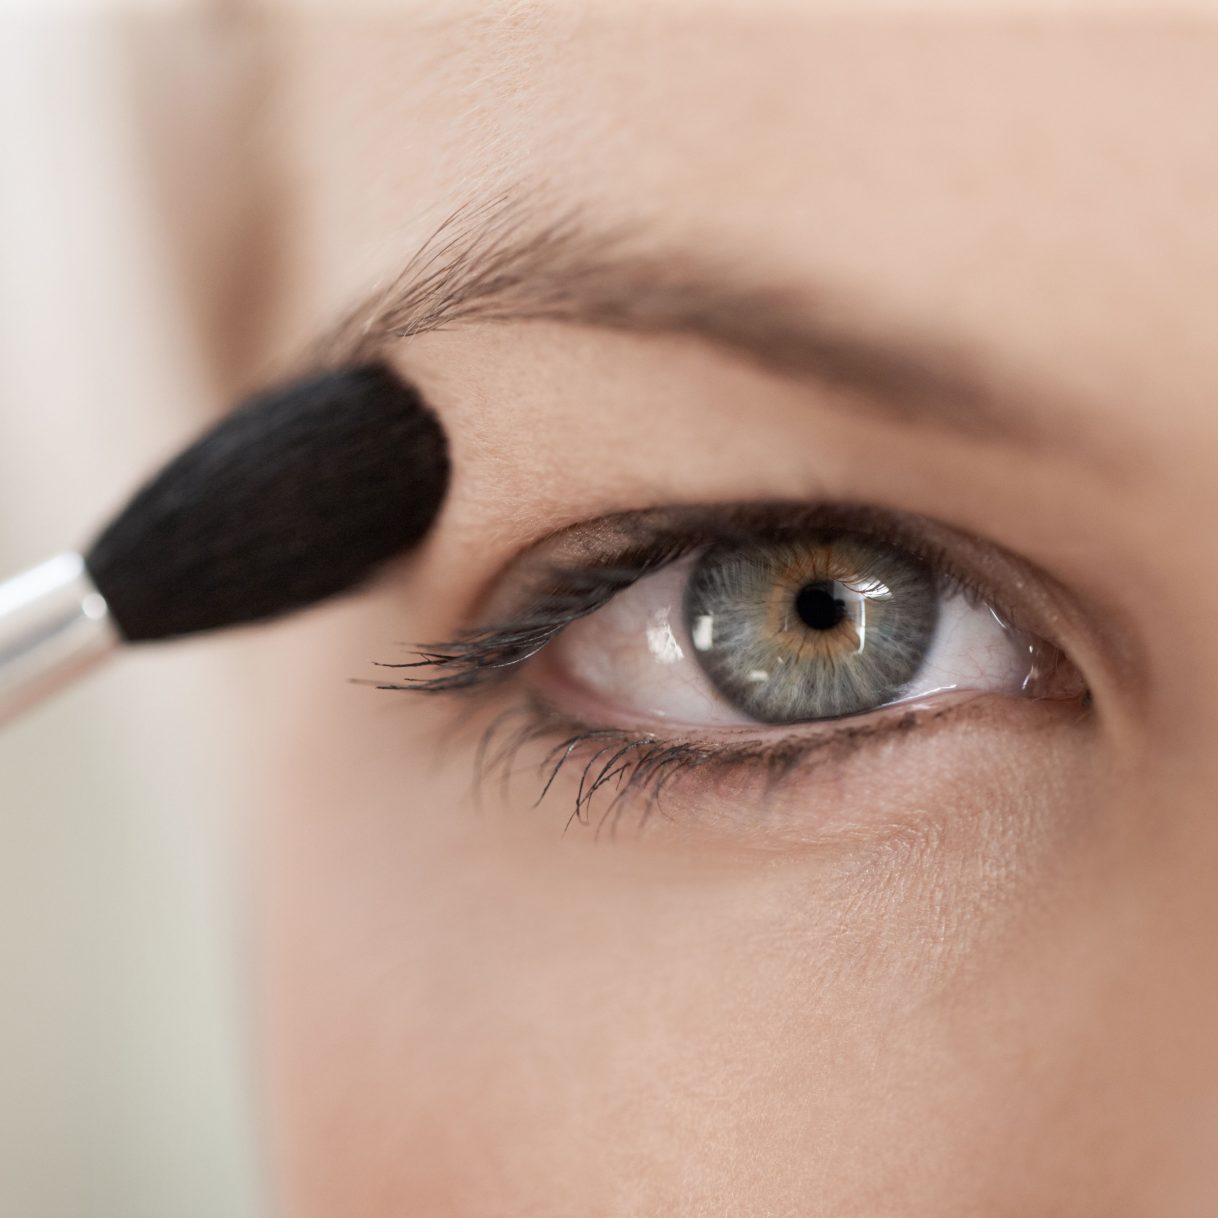 Makeup For Small Brown Eyes Makeup Tricks For Hooded Eyes Hooded Eyes Makeup Tips And Tricks